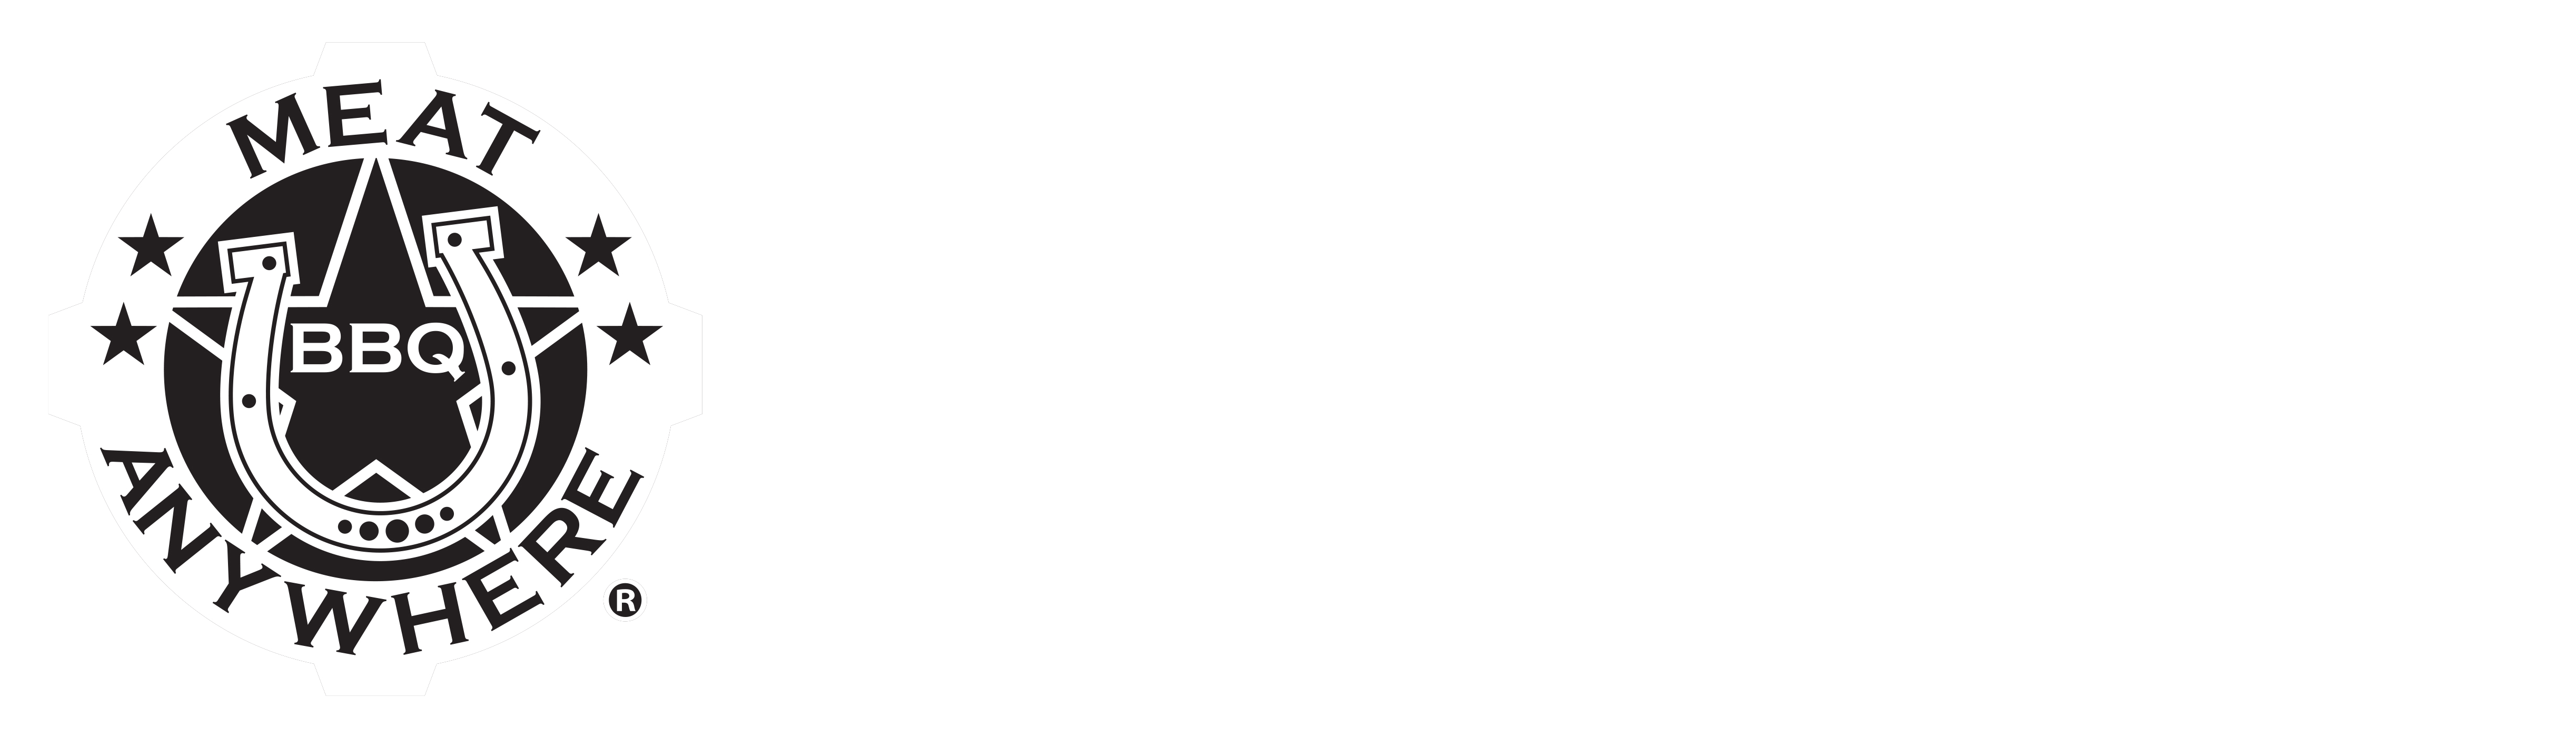 Meat U Anywhere BBQ & Catering 